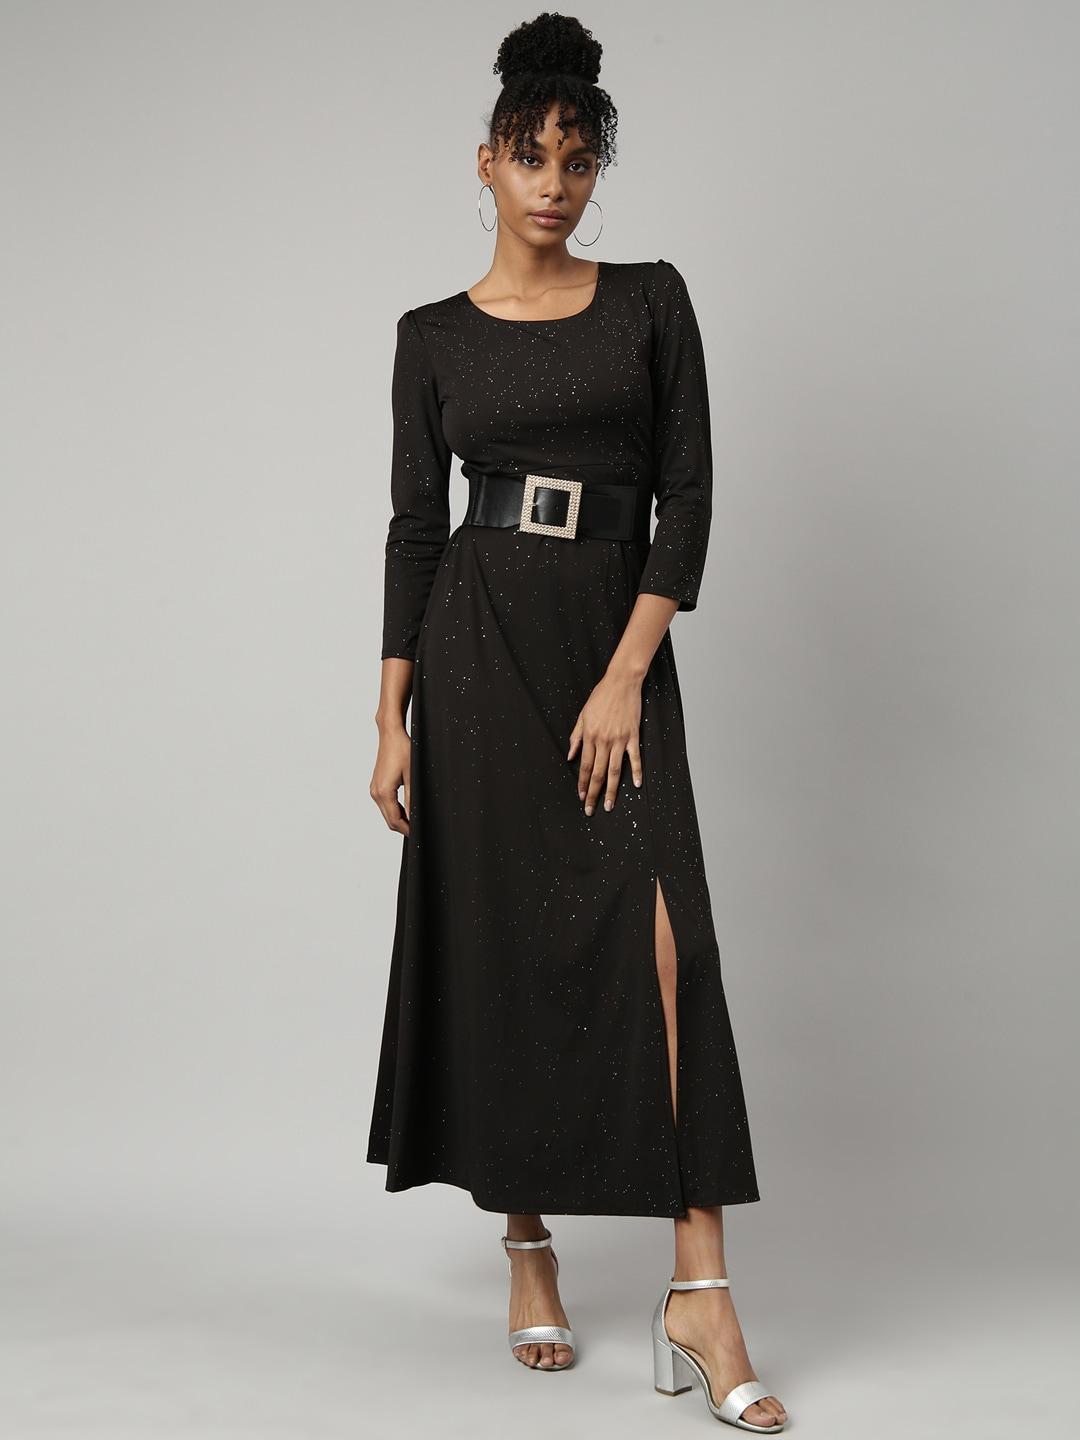 showoff-round-neck-regular-sleeves-bling-&-sparkly-belted-maxi-dress